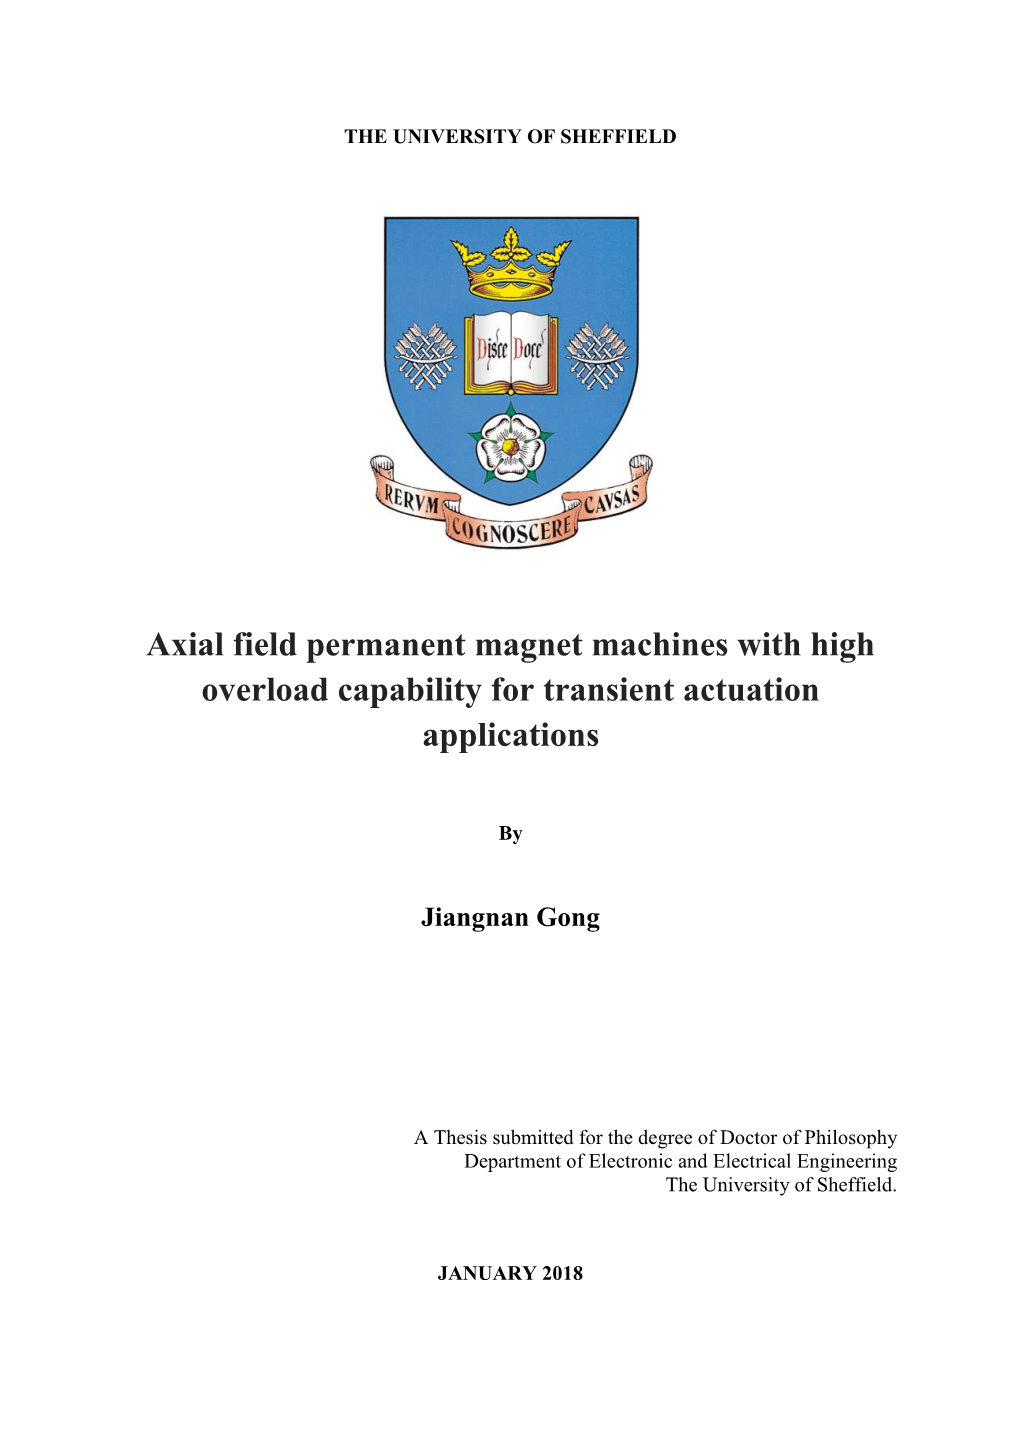 Axial Field Permanent Magnet Machines with High Overload Capability for Transient Actuation Applications